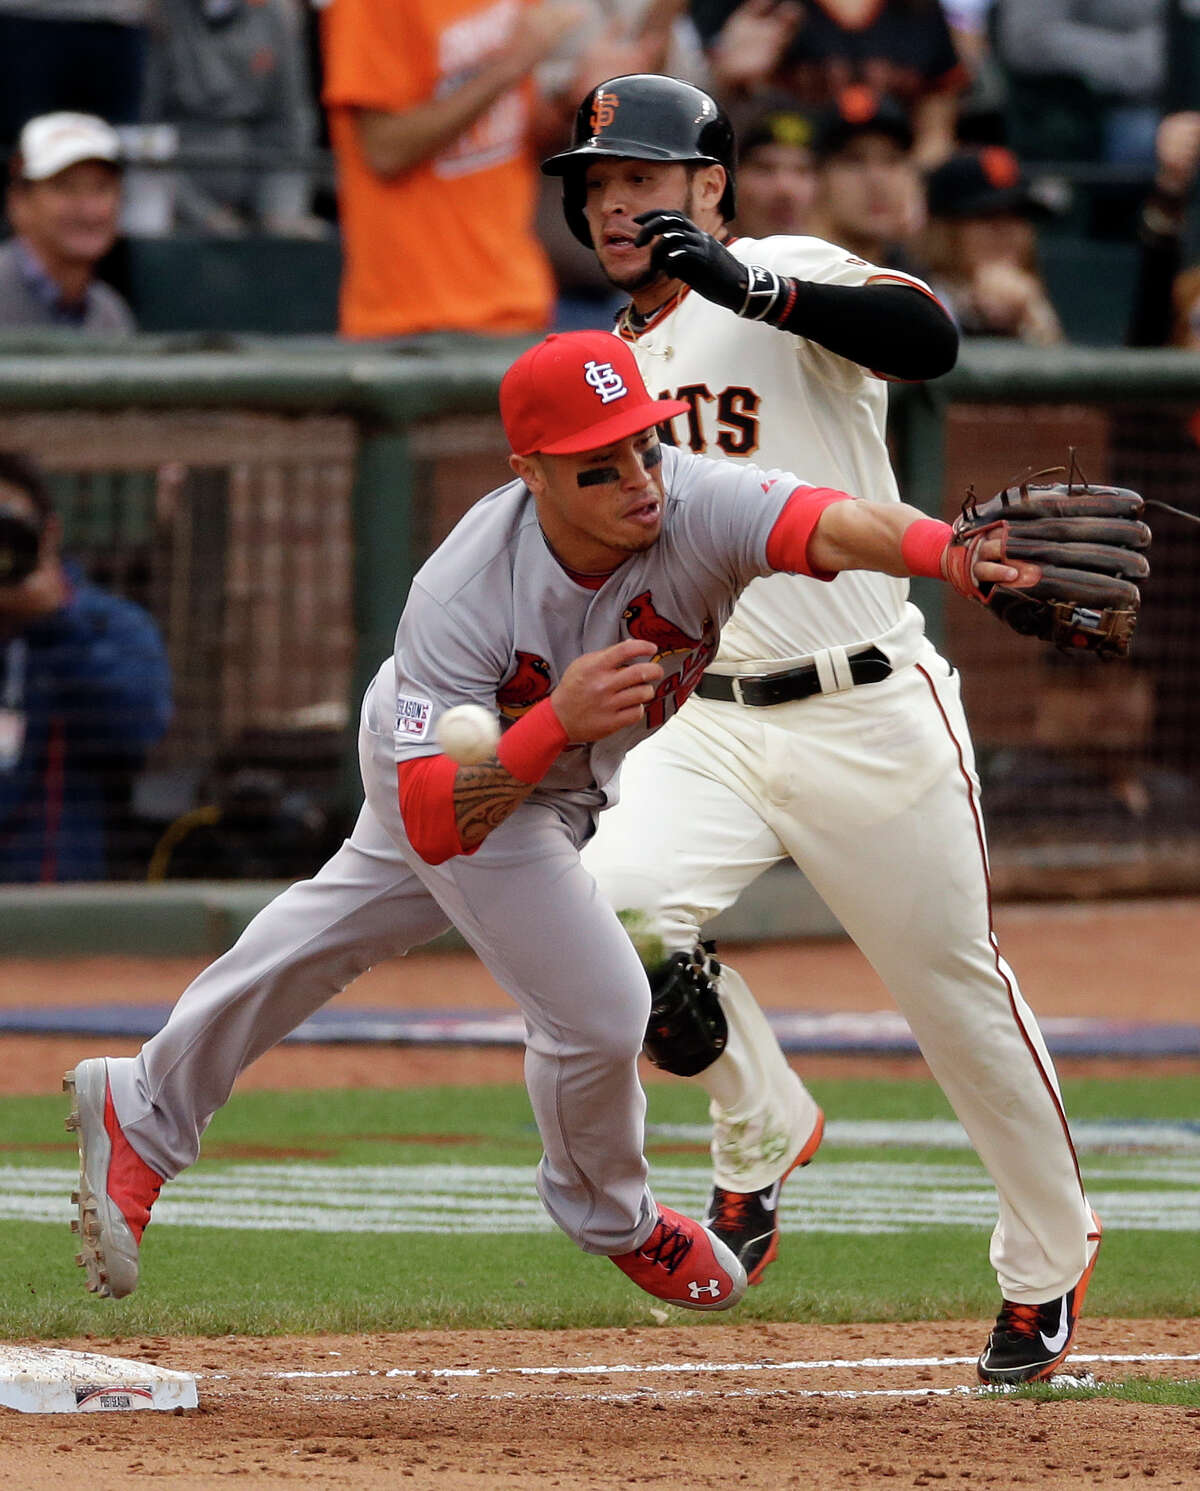 Kolten Wong can't reach Cardinals pitcher Randy Choates's errant throw after a bunt by Gregor Blanco, allowing the Giants to score the winning run in the 10th.